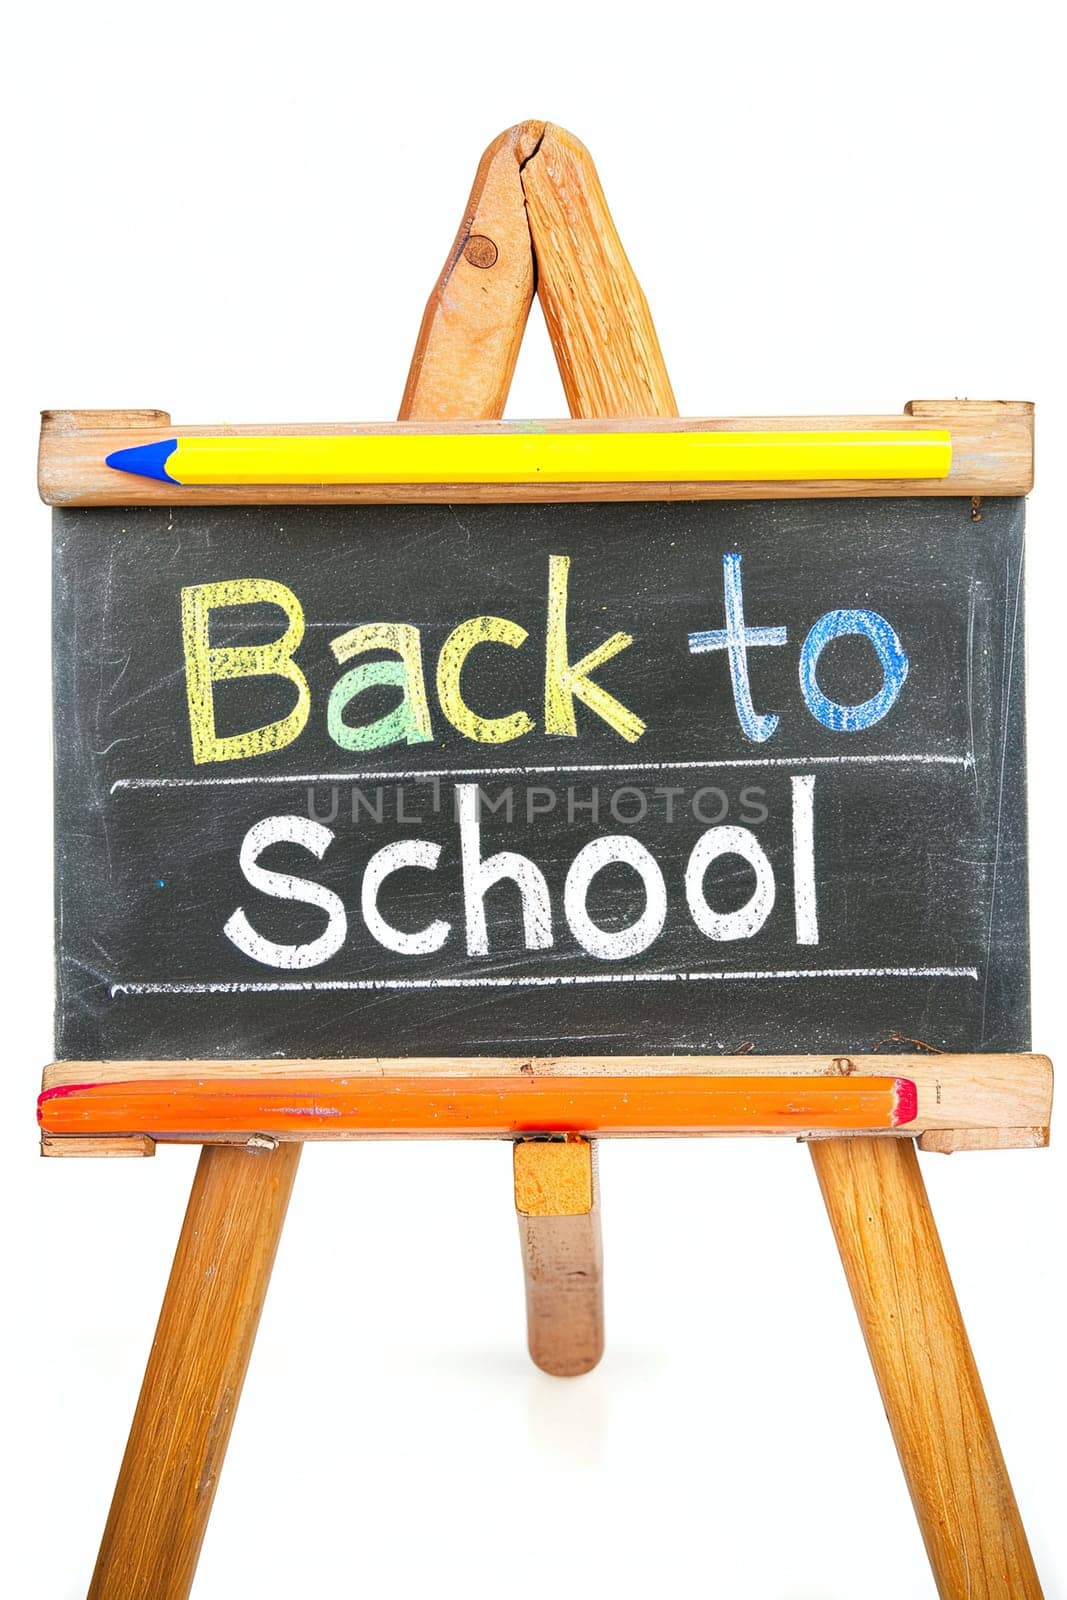 Back to school concept written on easel board and isolated on white background.